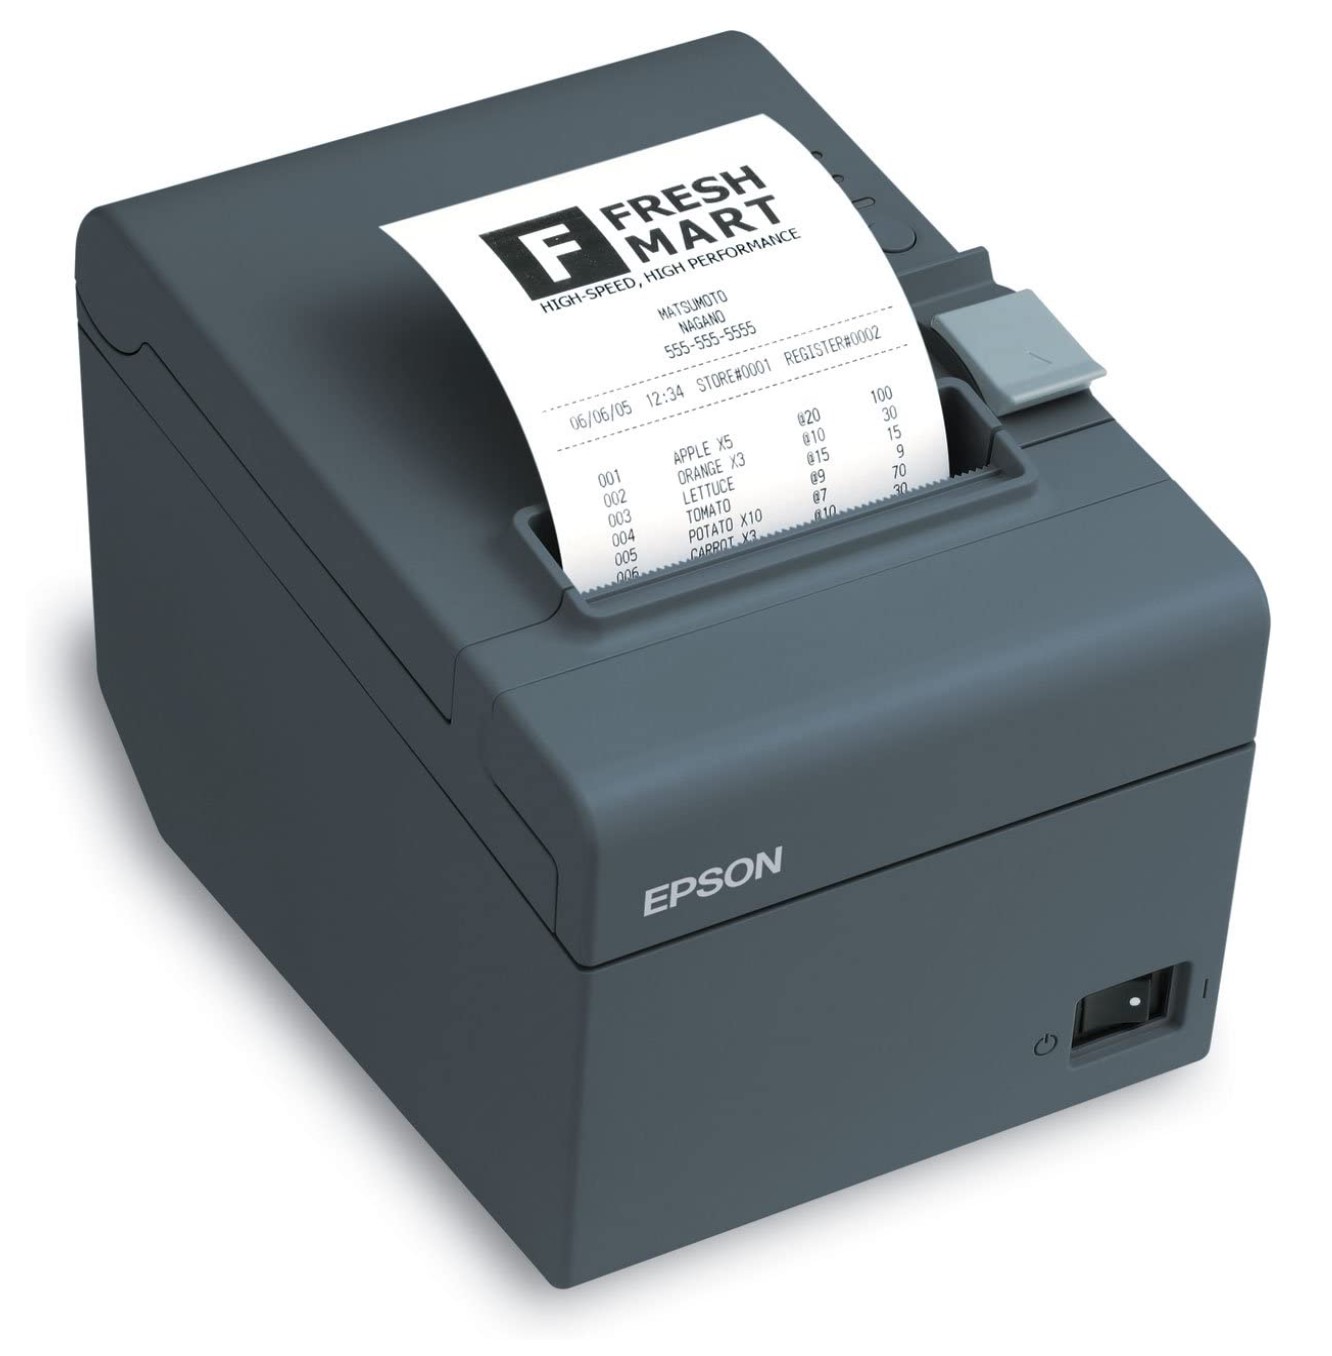 Atavoli.com Epson Ready Print T20 Direct Thermal Printer : Epson Ready Print T20 Direct Thermal Printer, Point-of-Sale (POS) Equipment Receipt Printers for Restaurants, Bars, Cafes, Bistros, Diners, Bakeries, Food Trucks, Hotels, Bed and Breakfasts, Resorts, Night Clubs